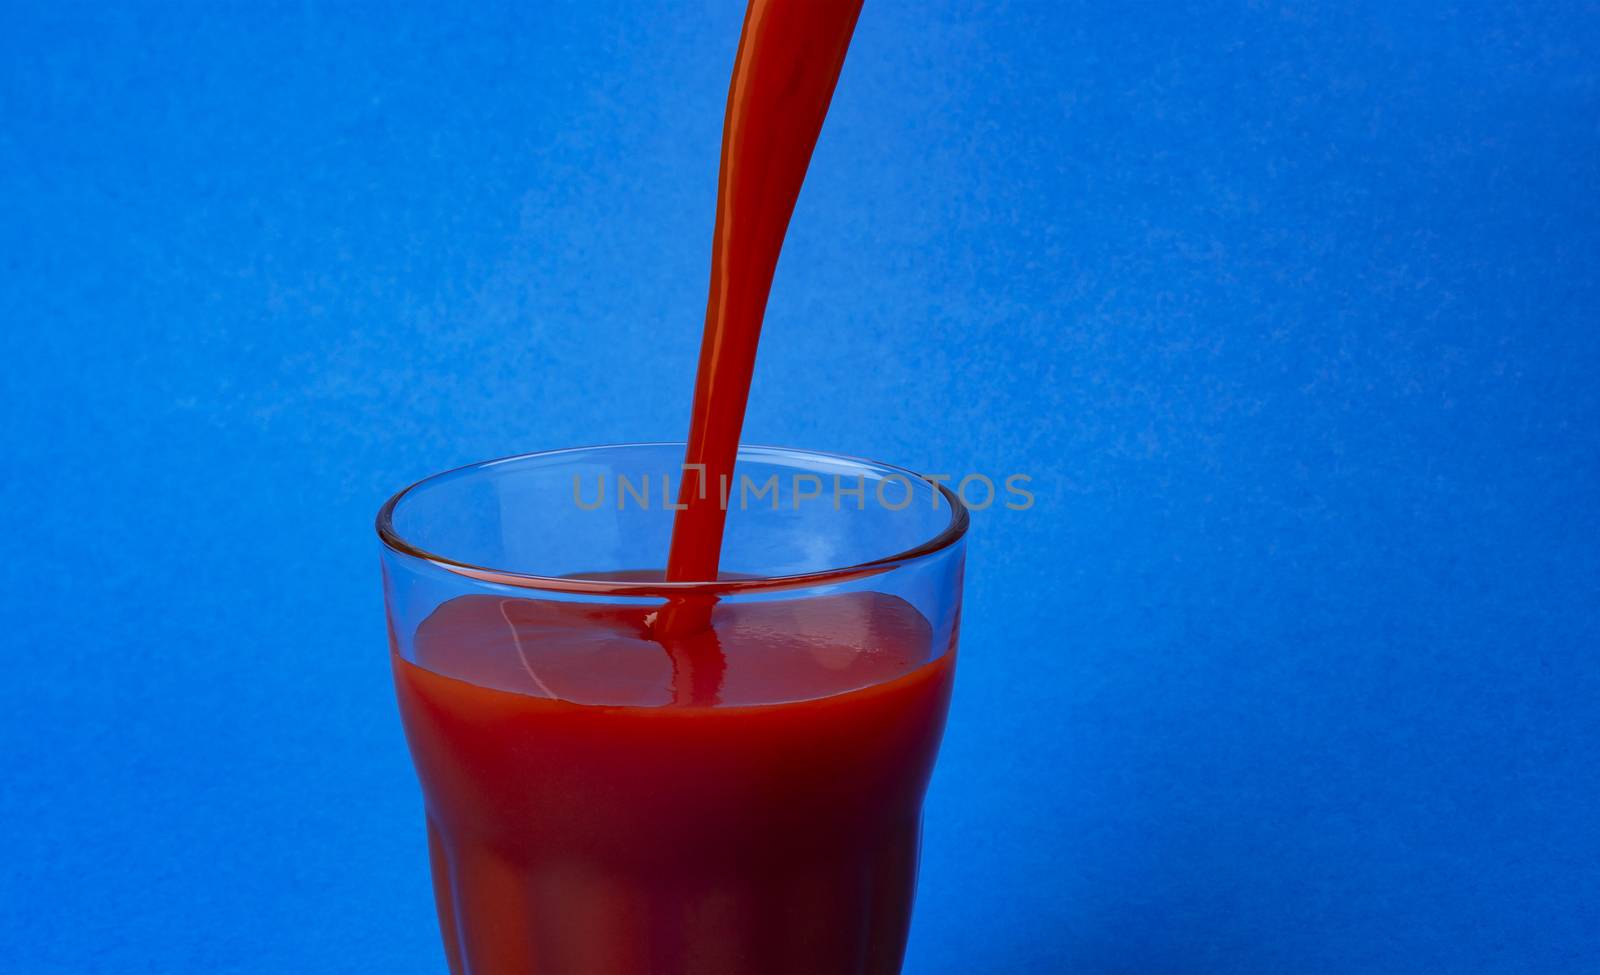 Tomato juice pouring into glass, isolated on blue background, with copy space, healthy drink concept, close-up